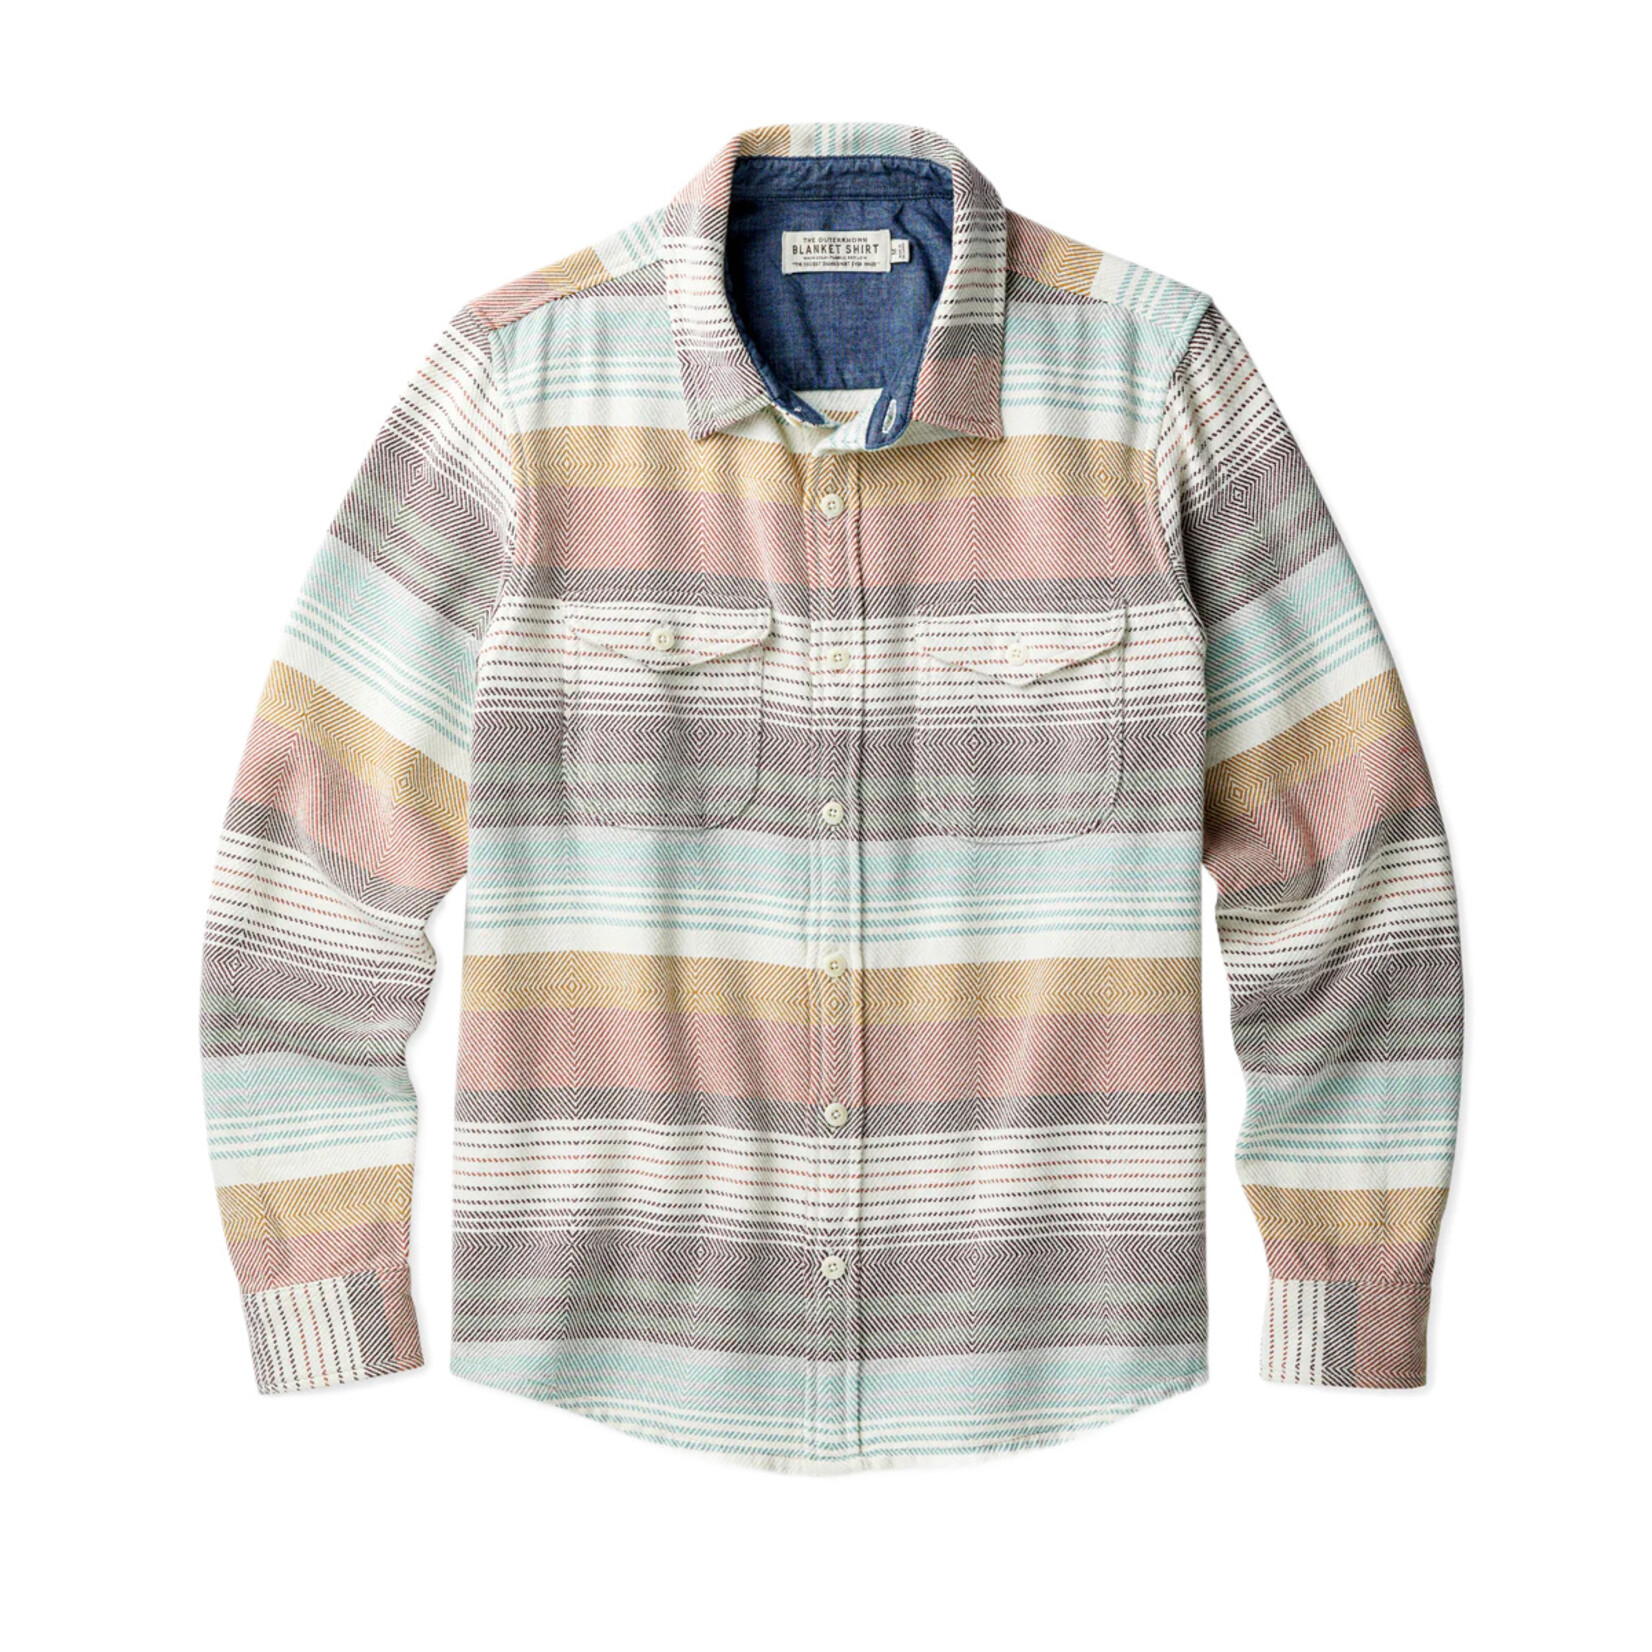 OuterKnown Blanket Shirt